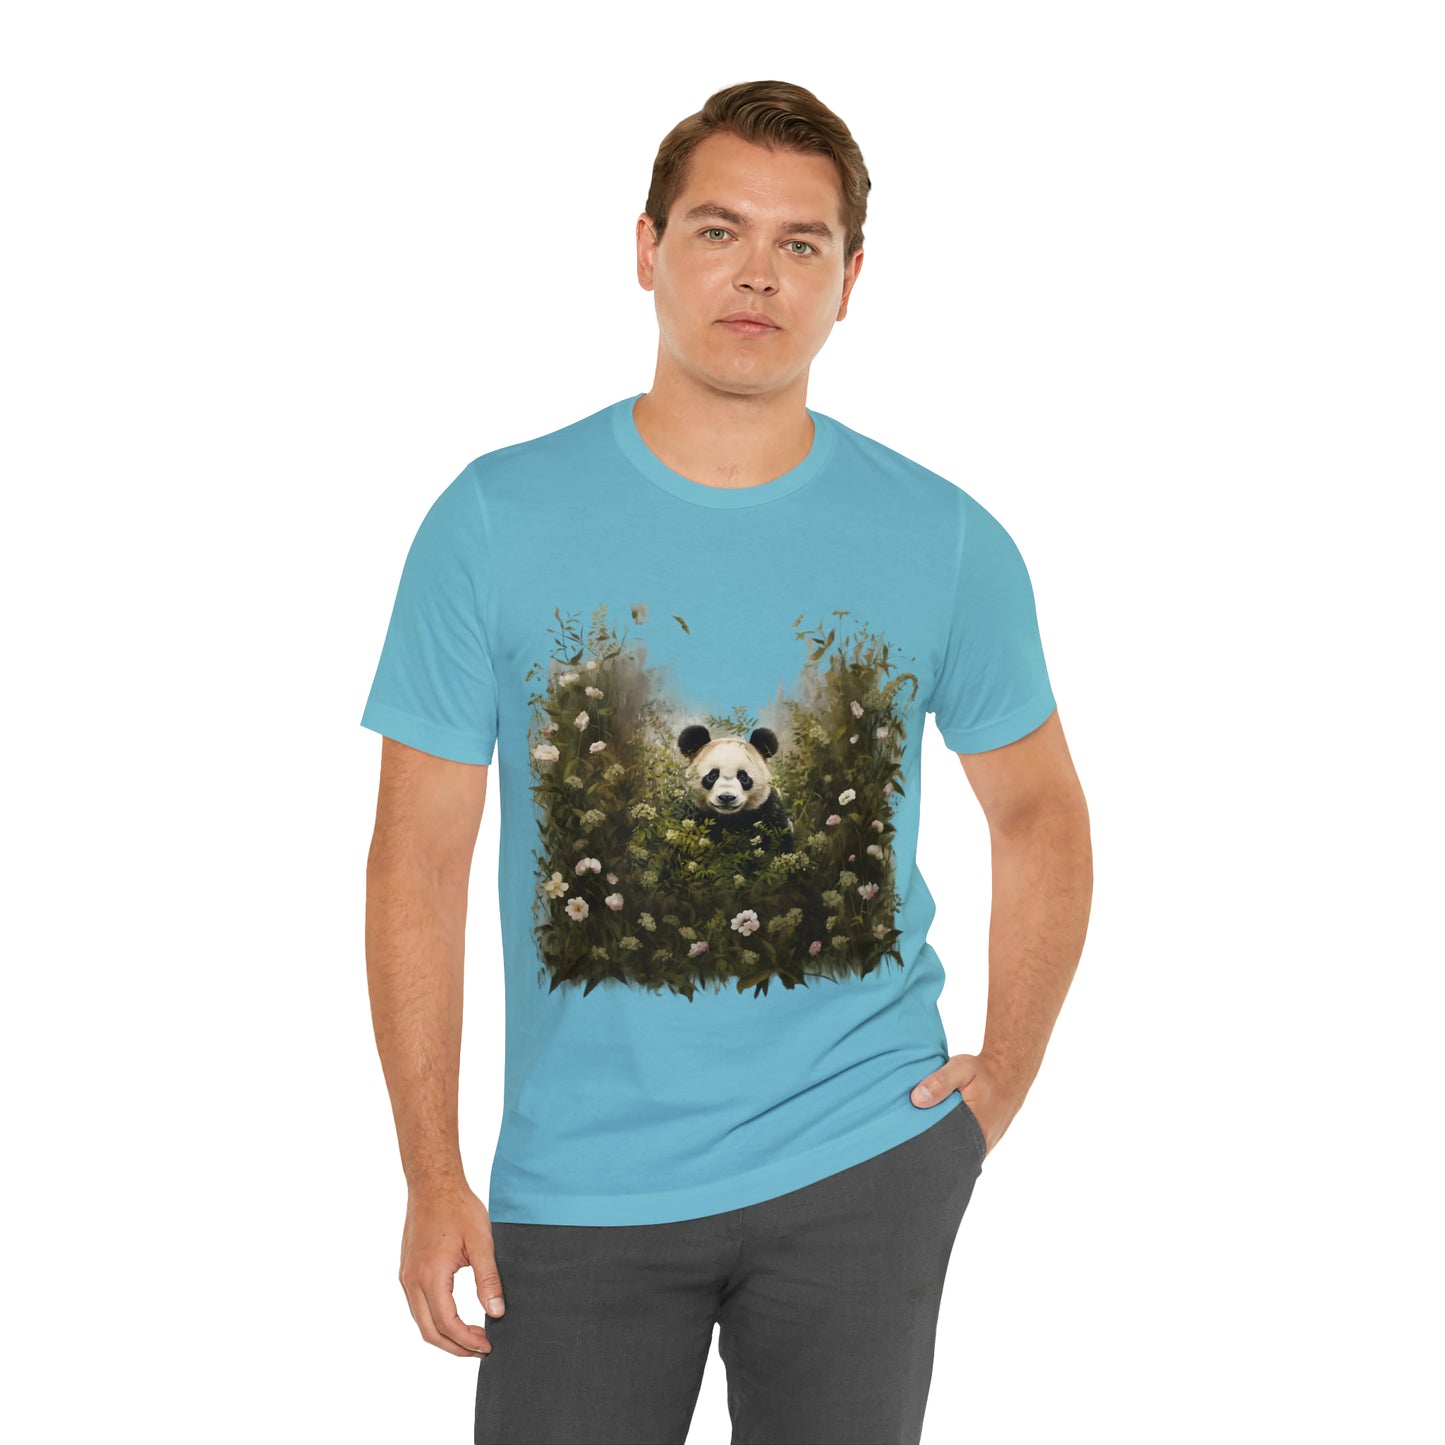 Panda Print Tee - A Tee with an Artistic Touch